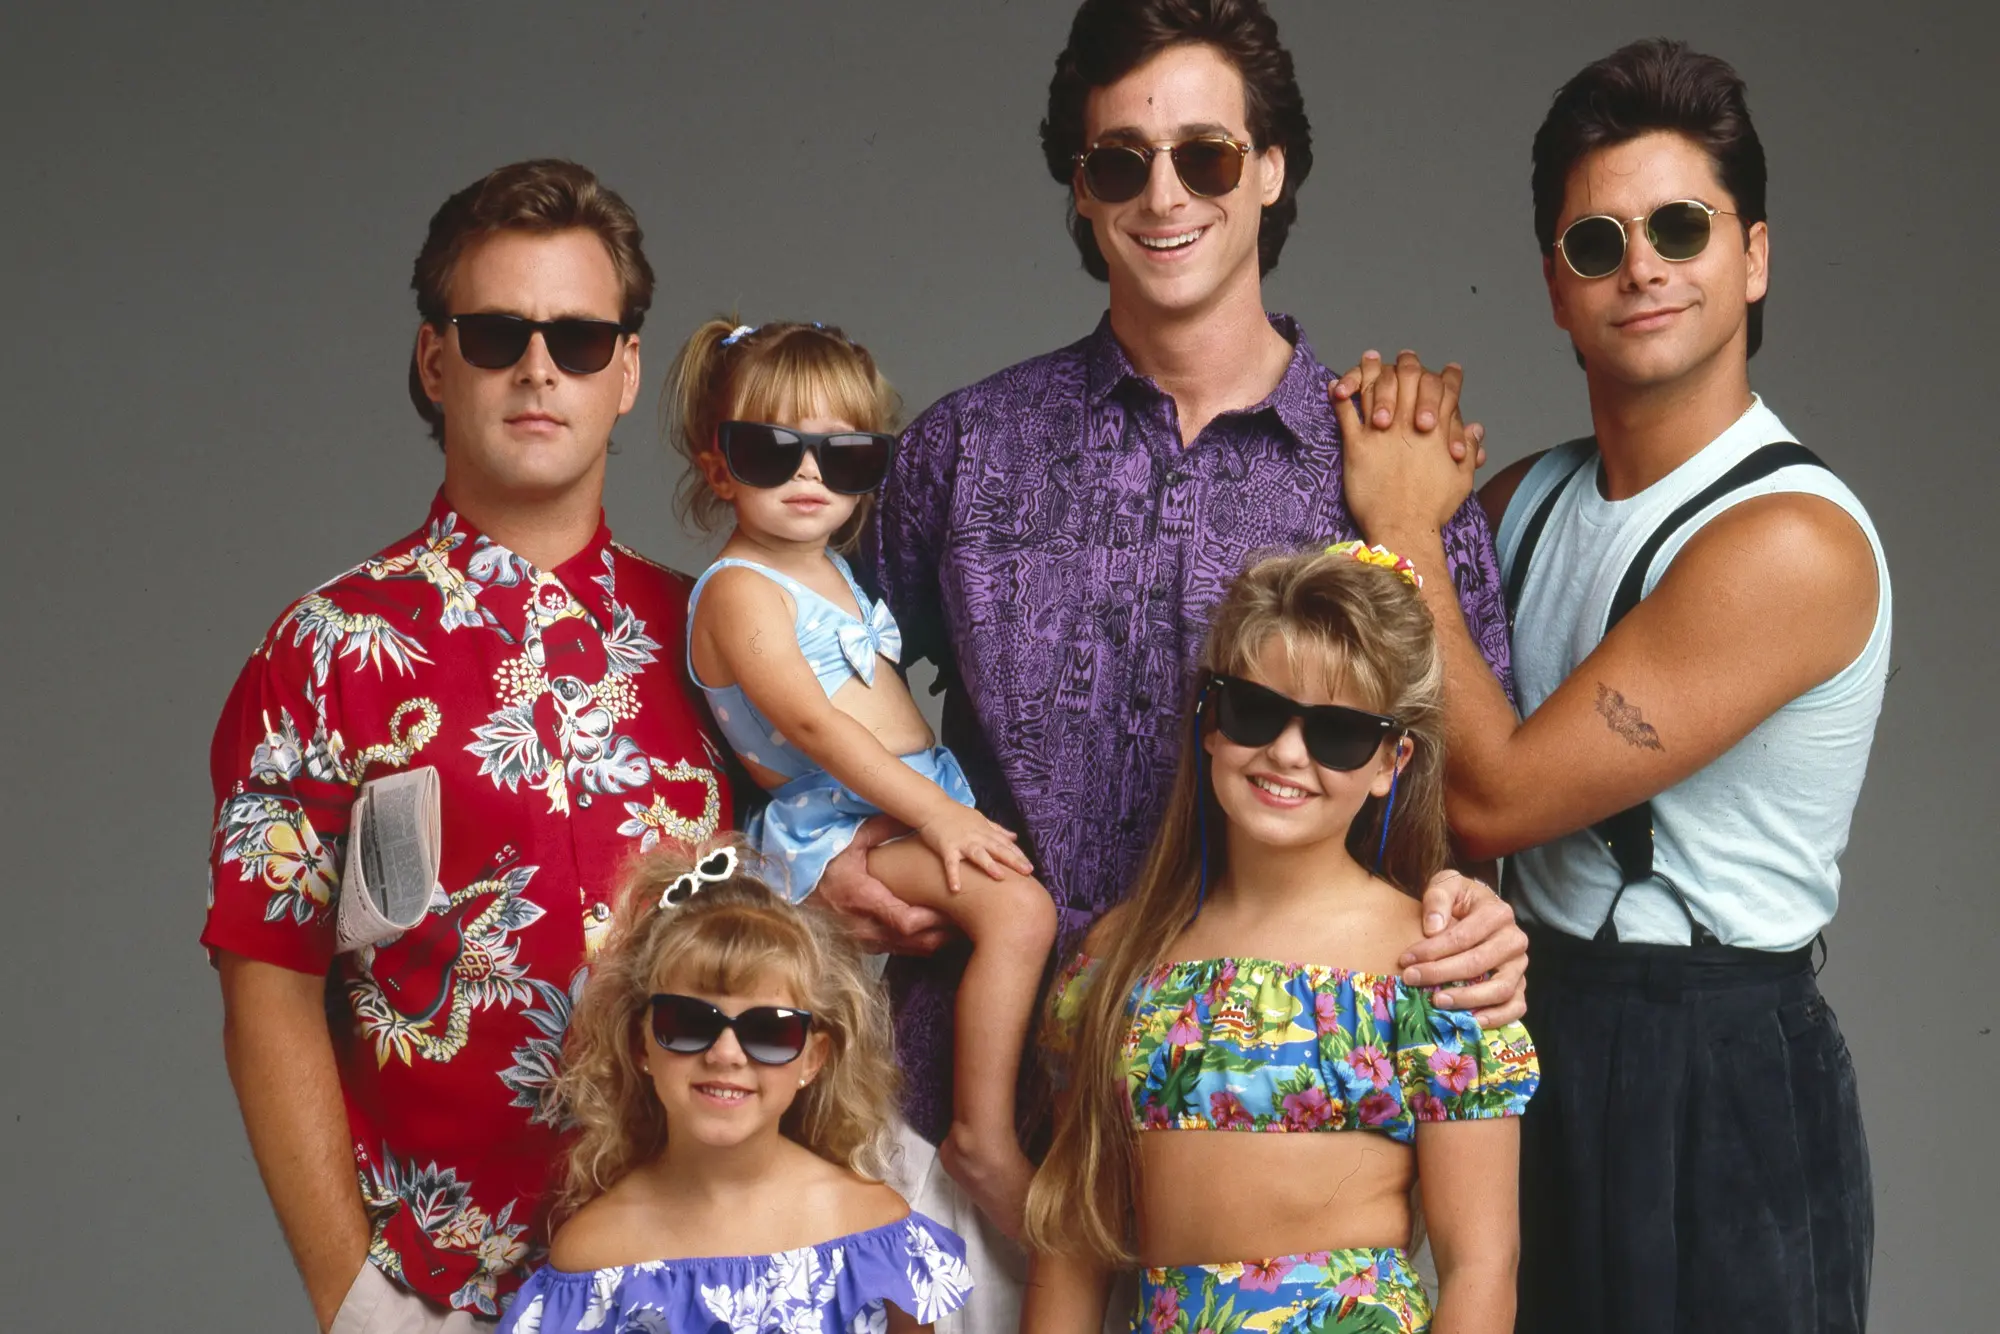 Full House Rewind Premieres Today, Hosted by Dave Coulier – Rewatch This Classic Show With Some of The Cast & Crew